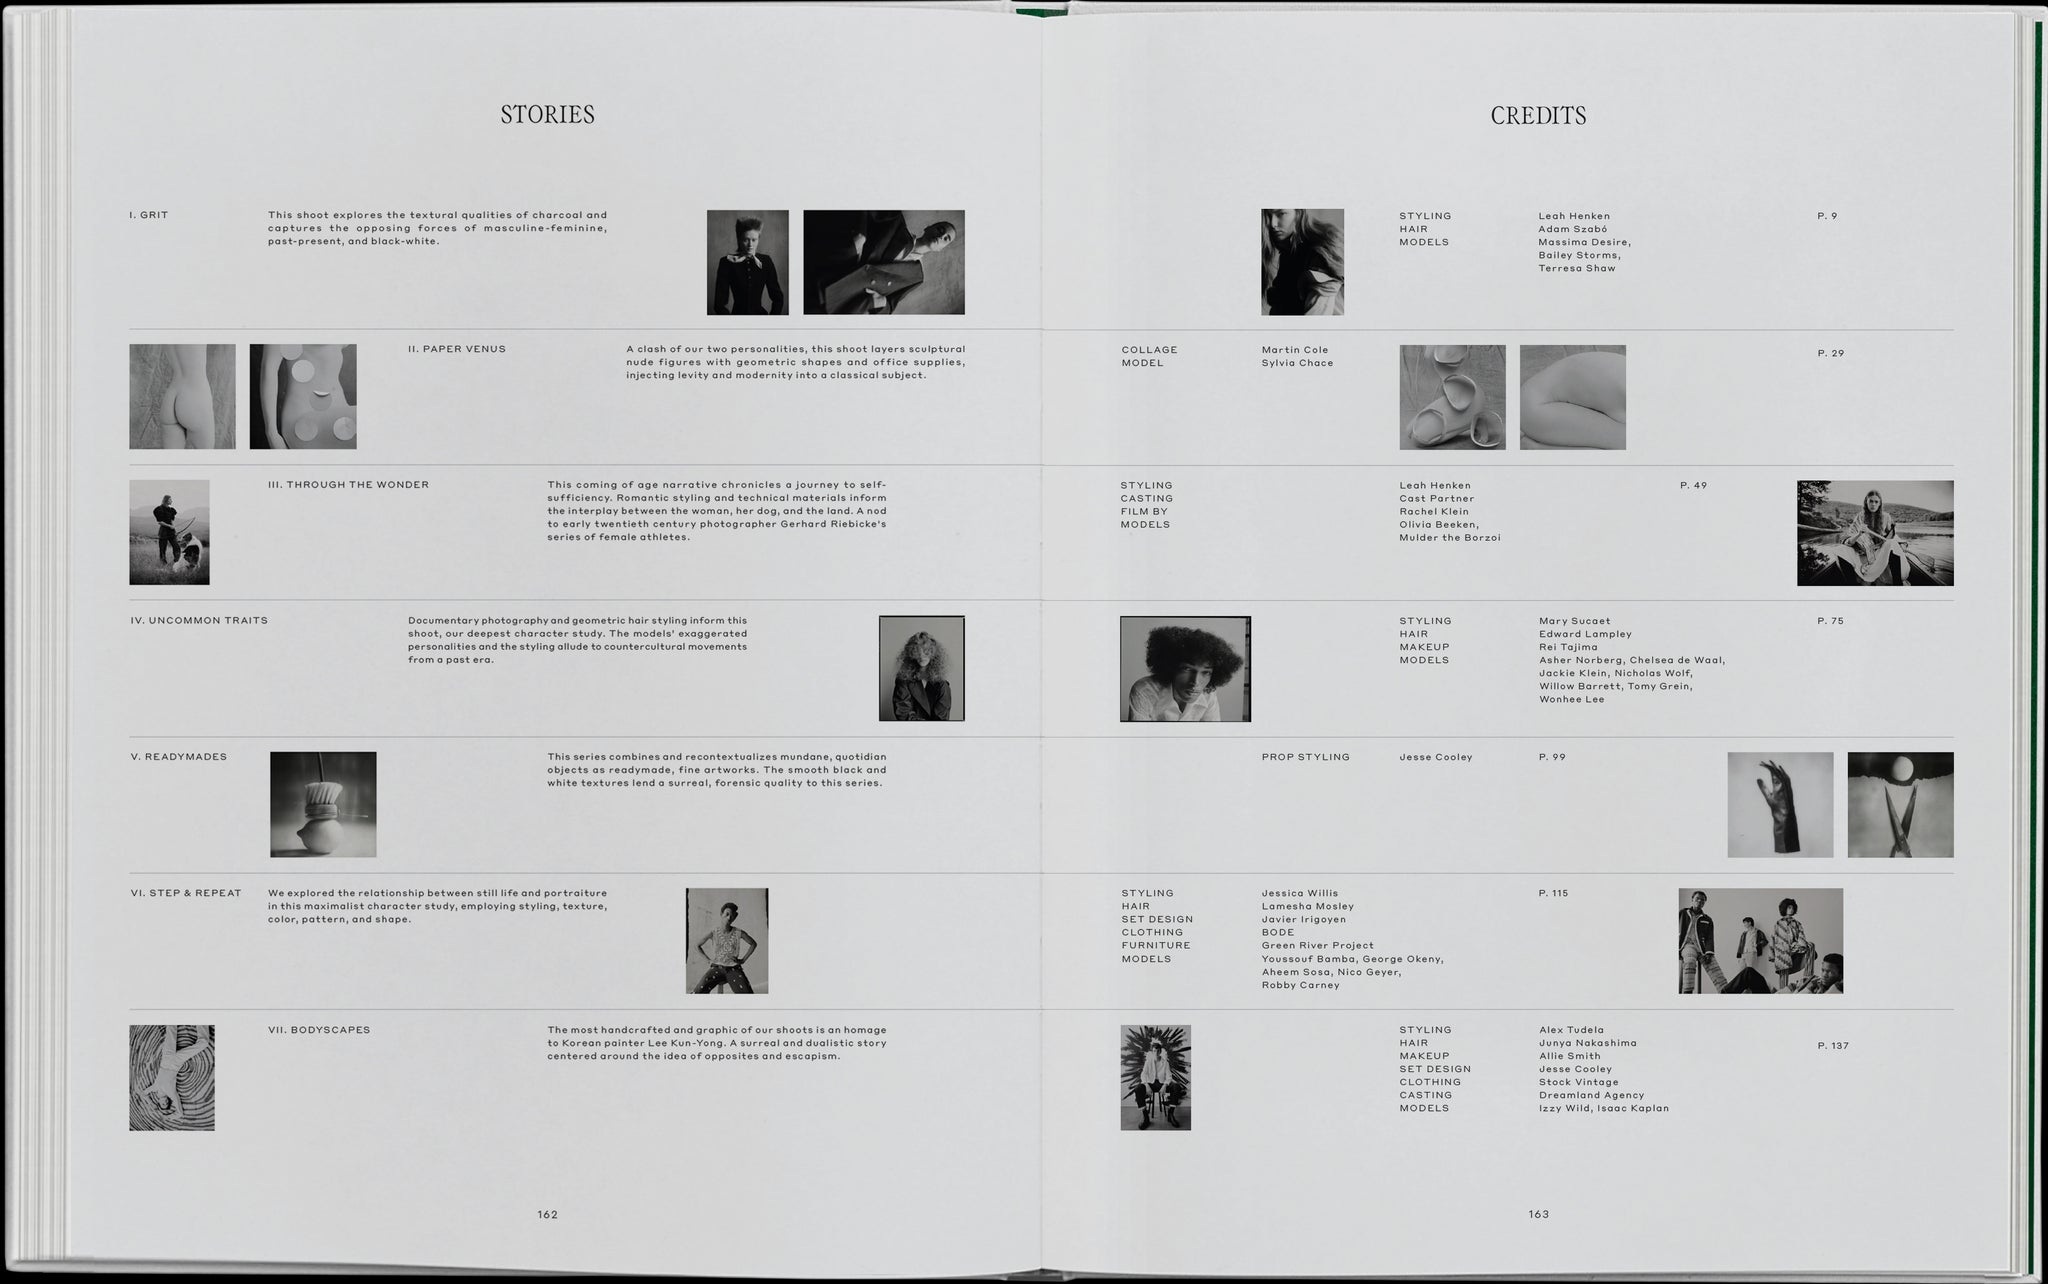 Book layout. Left: Descriptions of every chapter in the book. Right: Credits for all the team members who took part in the image making.